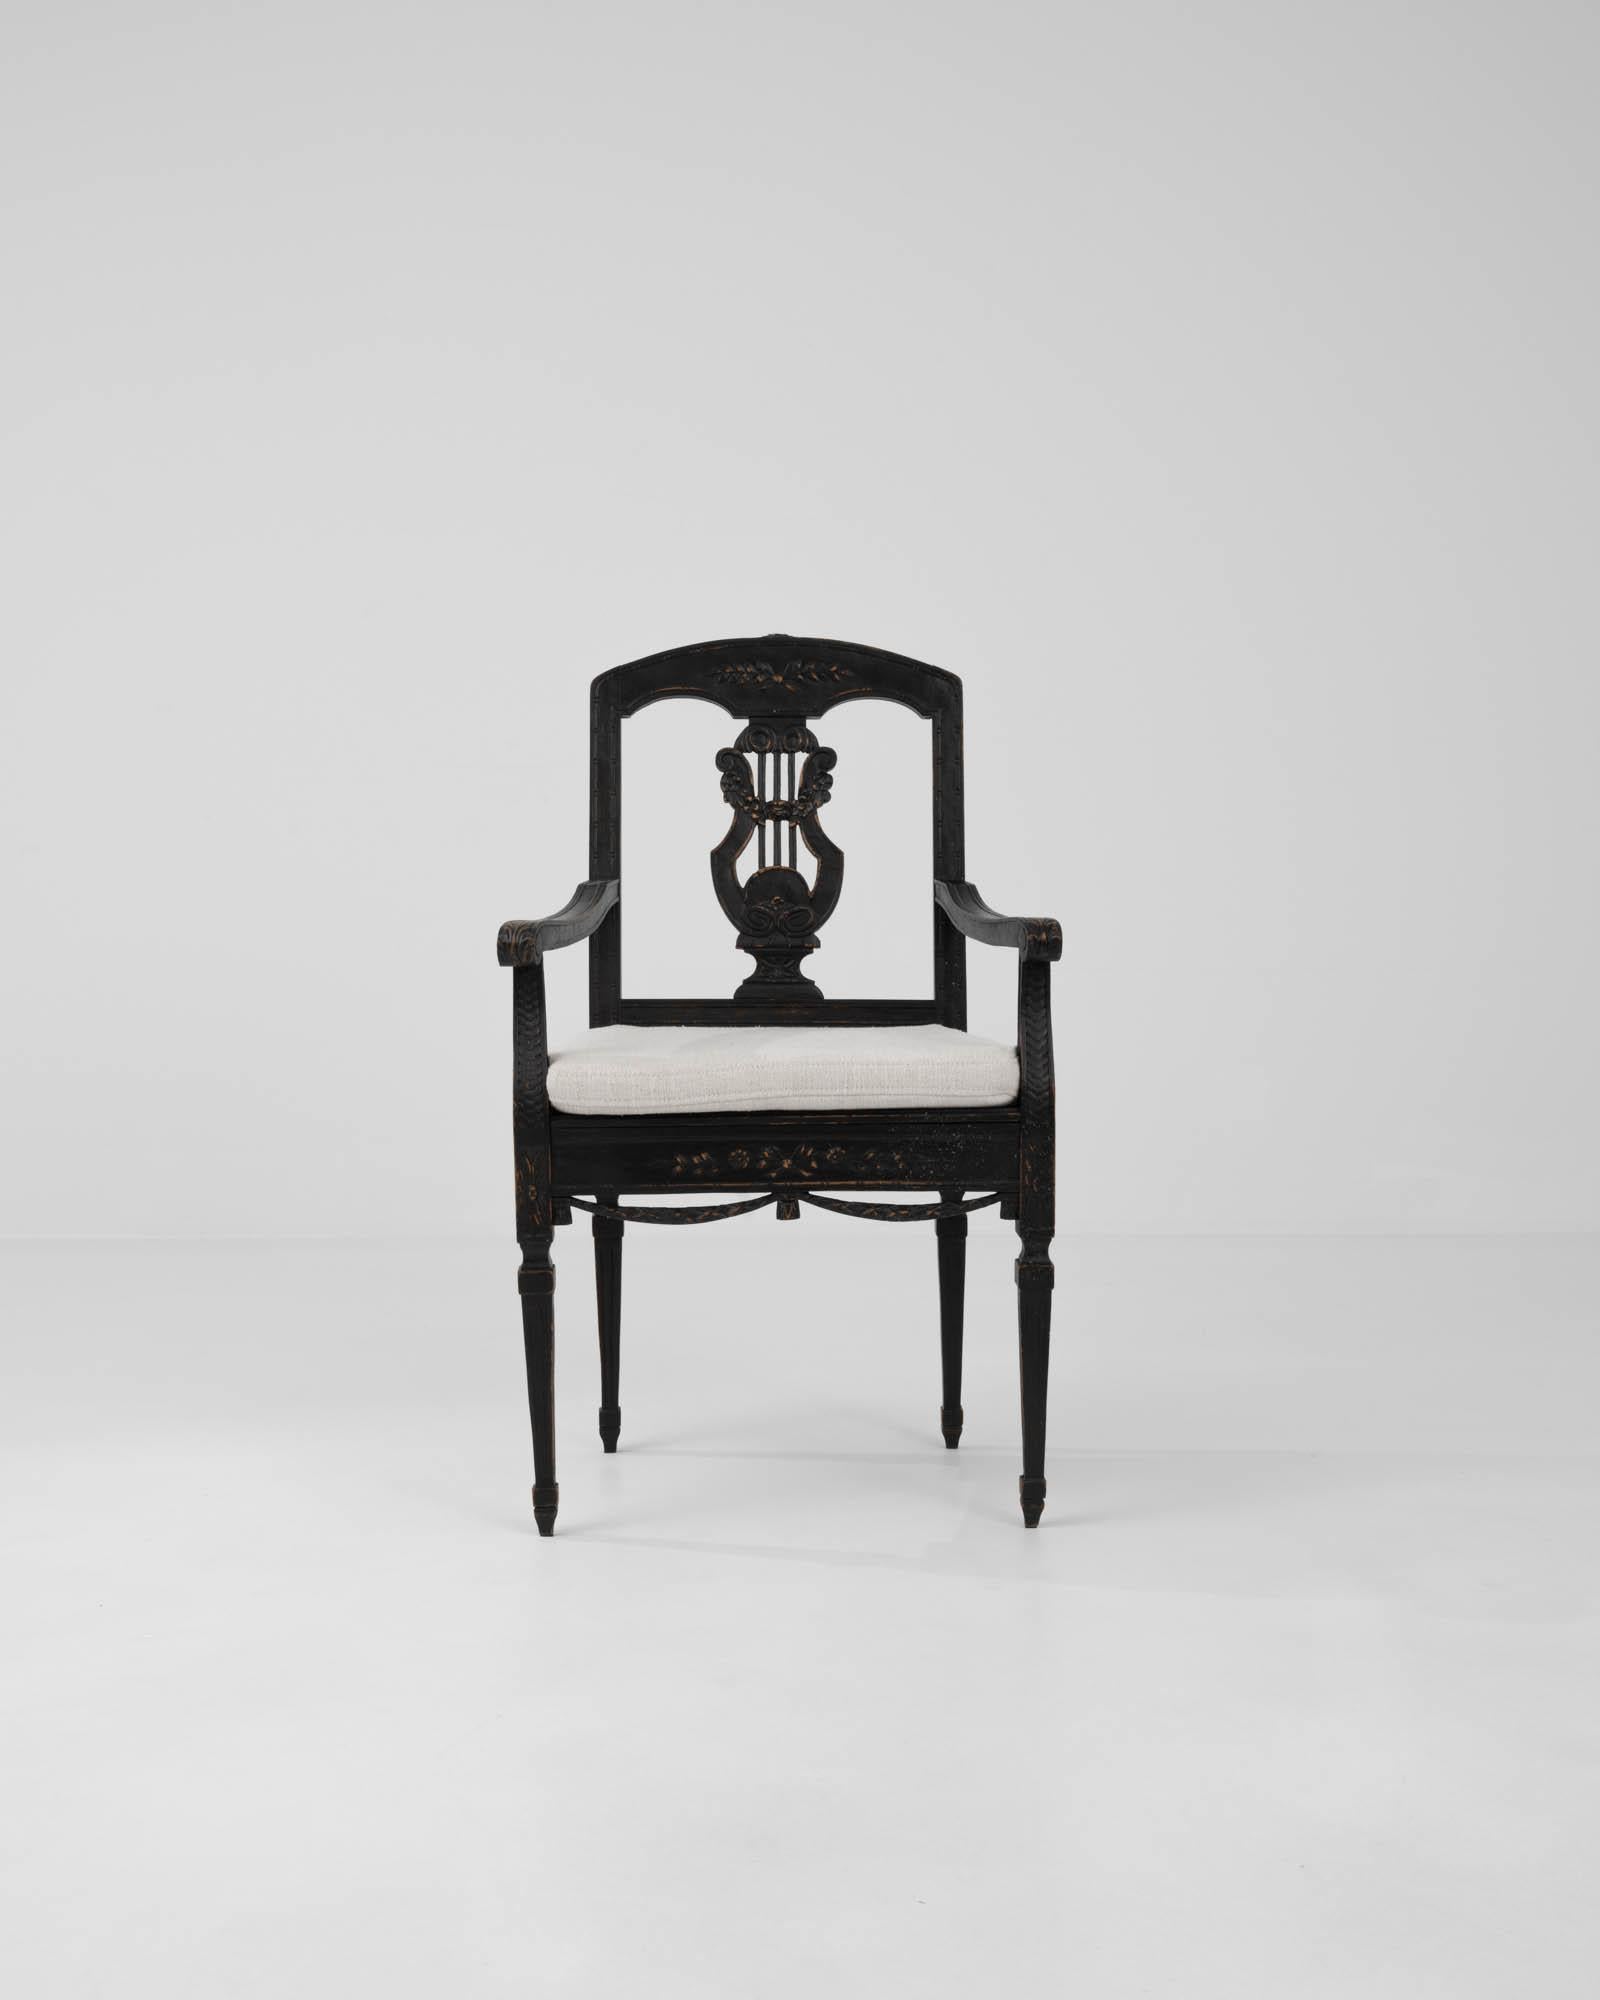 A carved wooden side chair made in 19th Century France. The black patina of this chair contrasts with the reupholstered white upholstery of the seat.
Intricate carved details define the style: tapered feet with fluted legs; rosettes,and carved